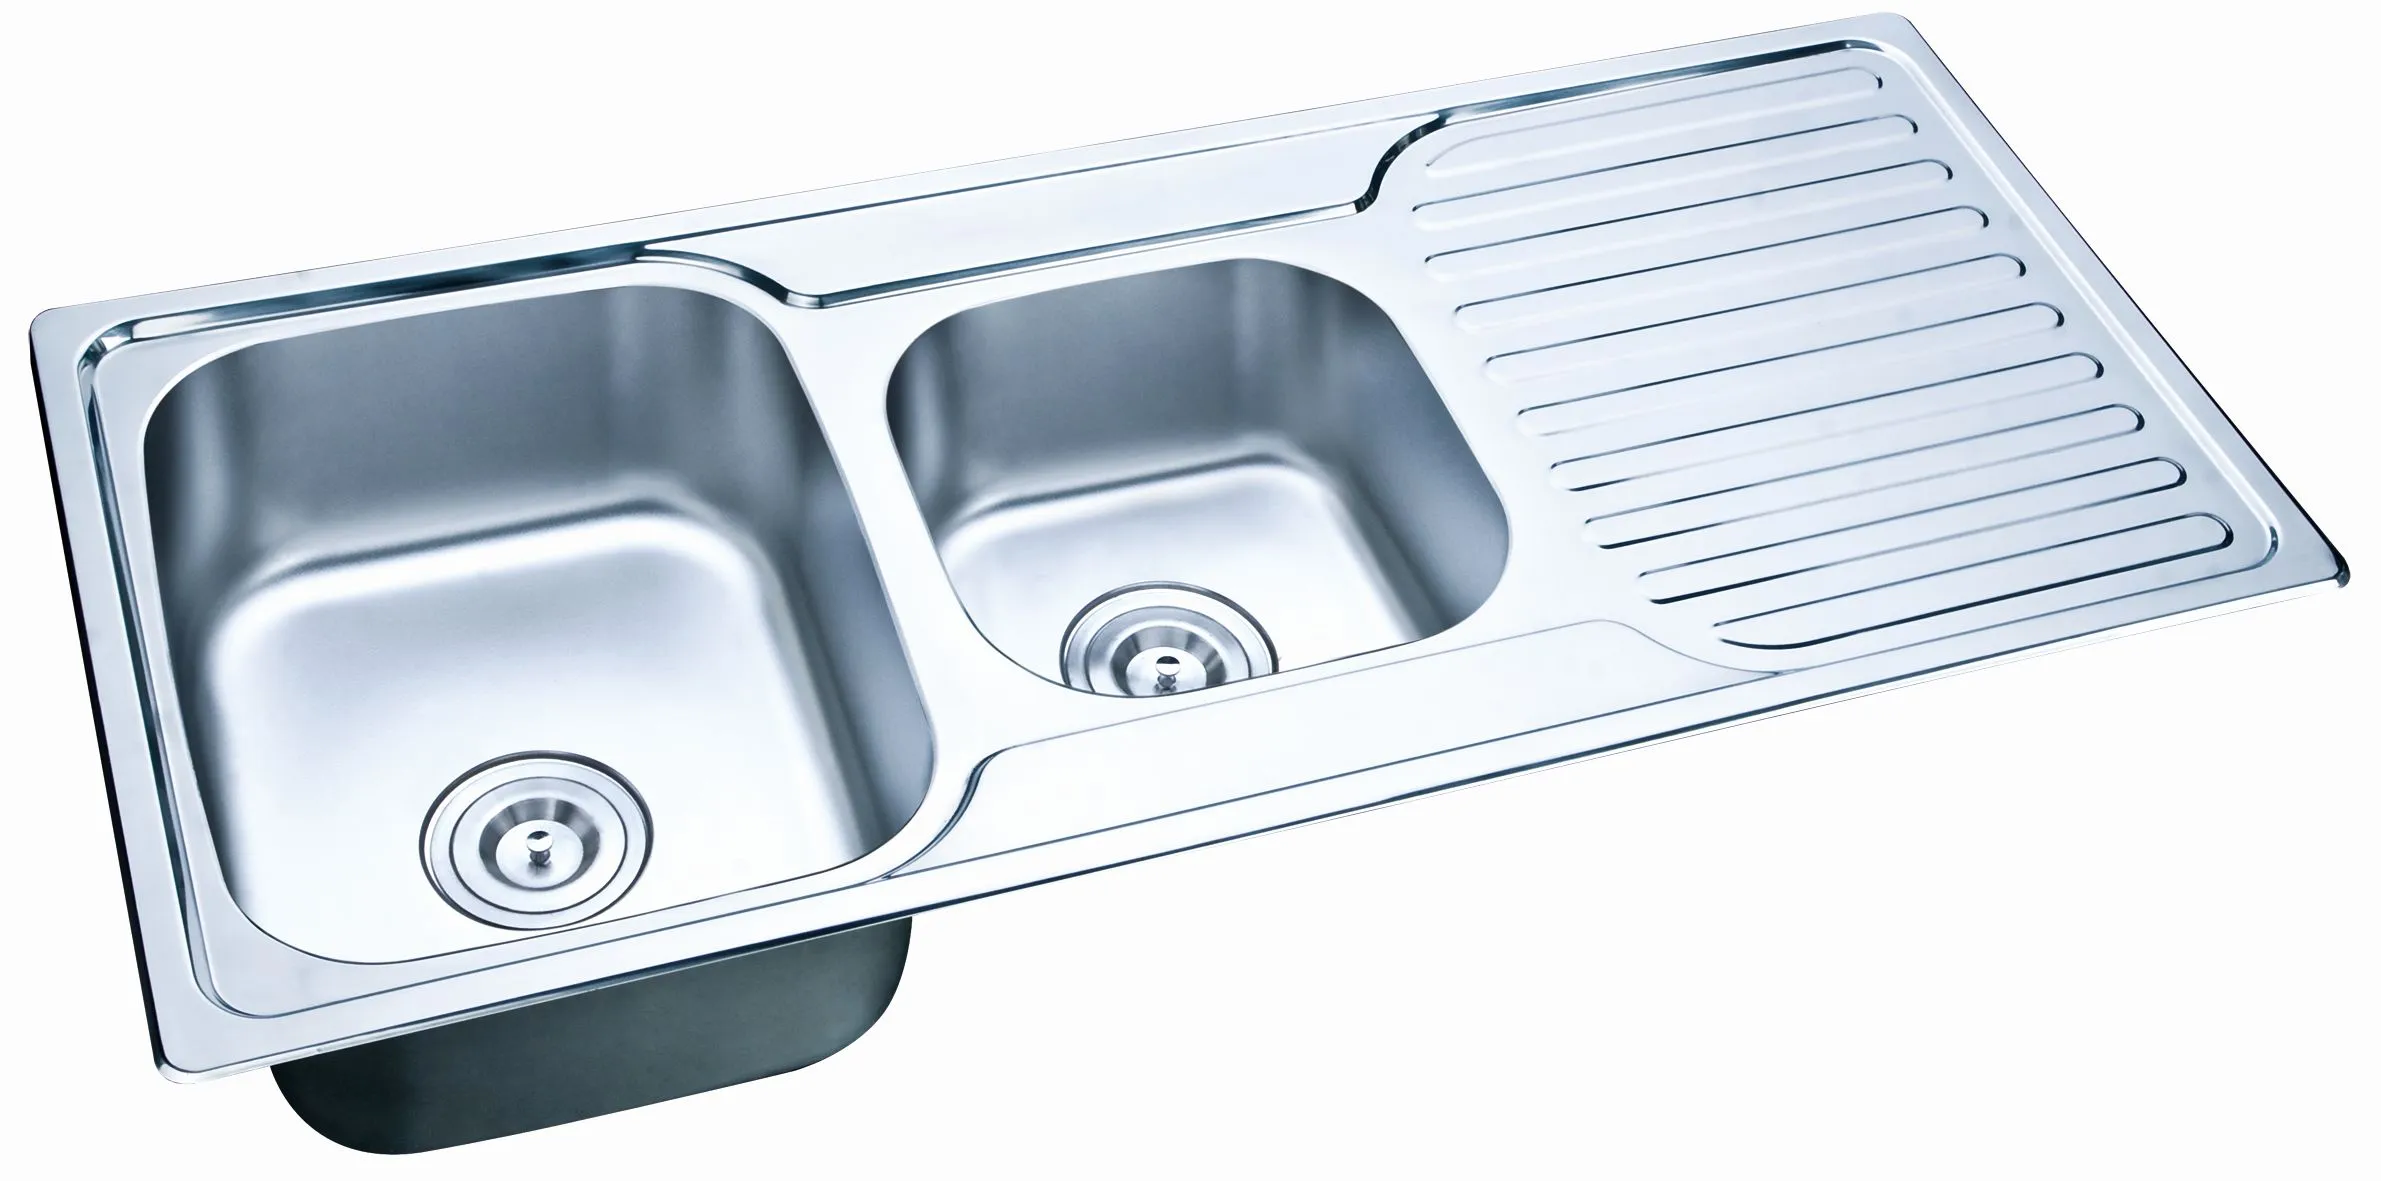 Foshan square double bowl washing sink 10848BS